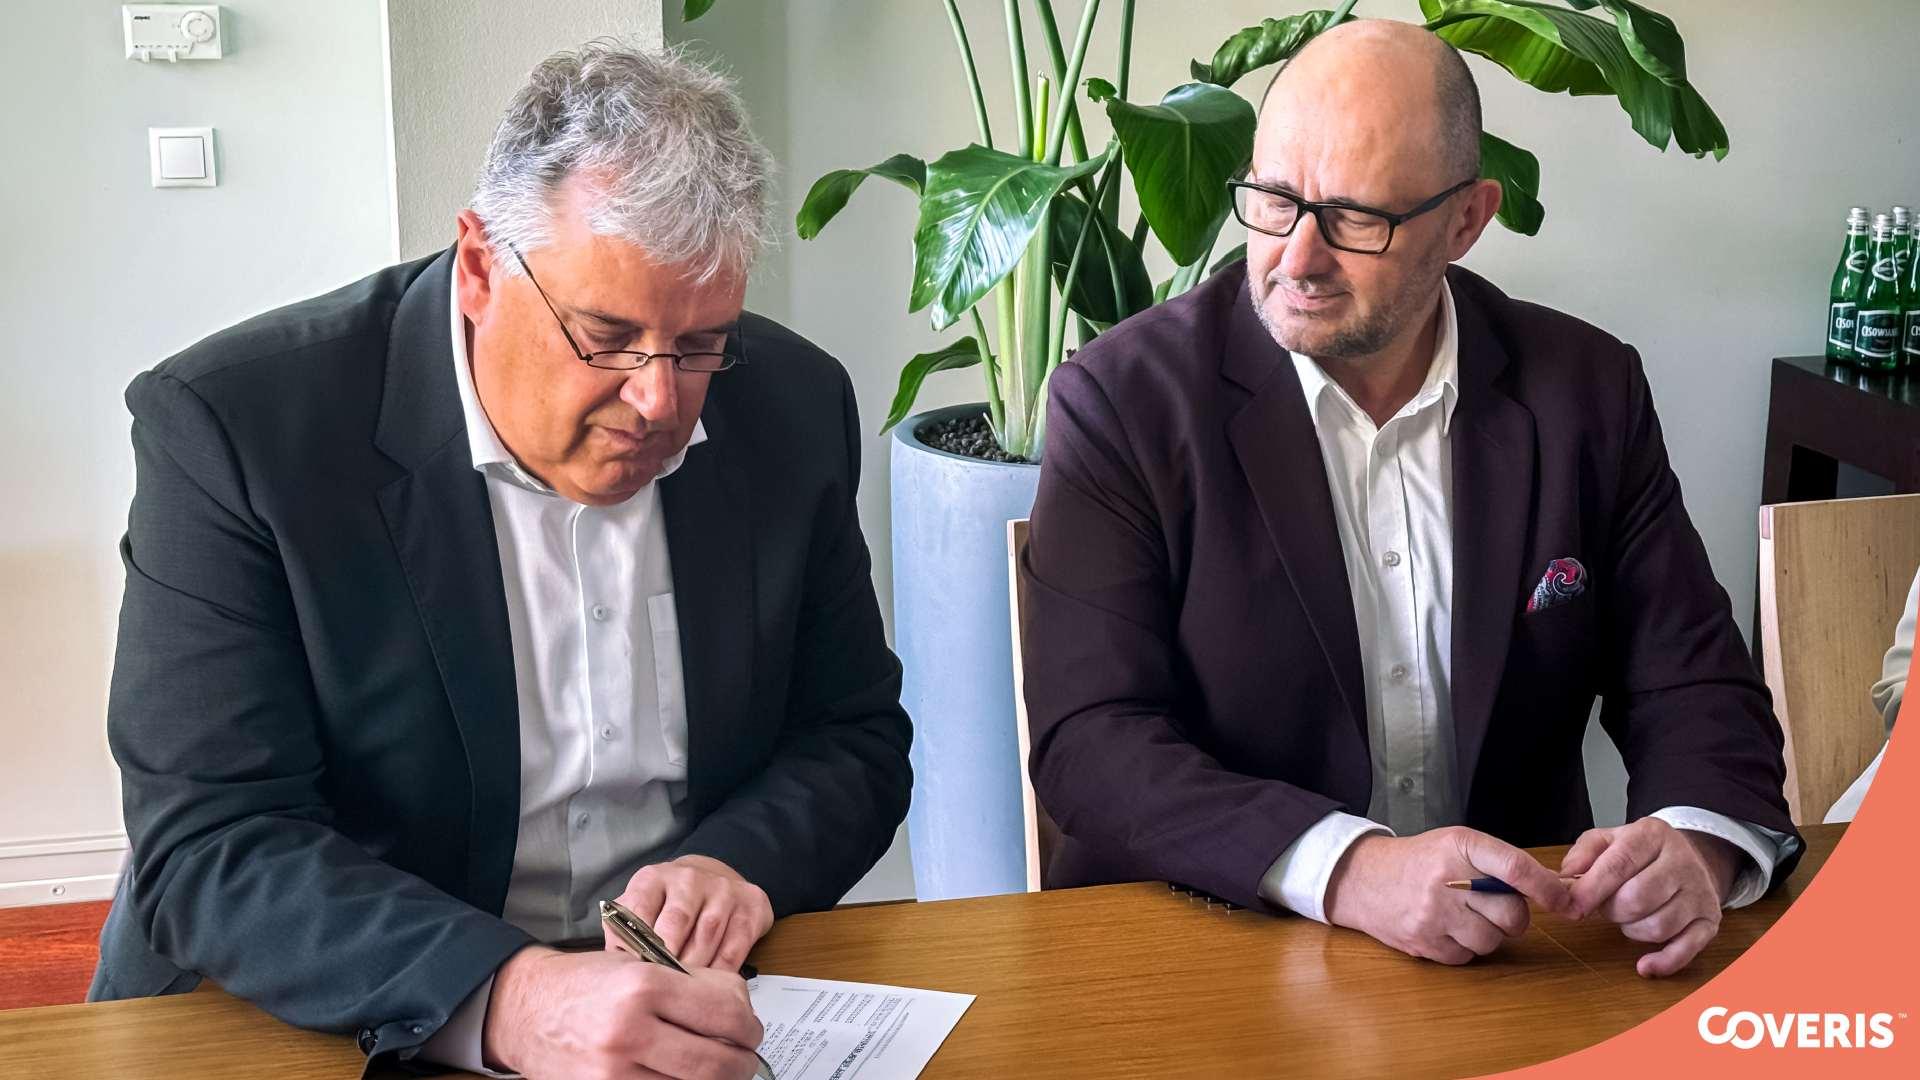 Contract signing between Coveris and HADEPOL FLEXO. From left, Christian Kolarik, CEO Coveris, and Leszek Gumowski, former owner and Managing Director HADEPOL FLEXO (President of the Board).